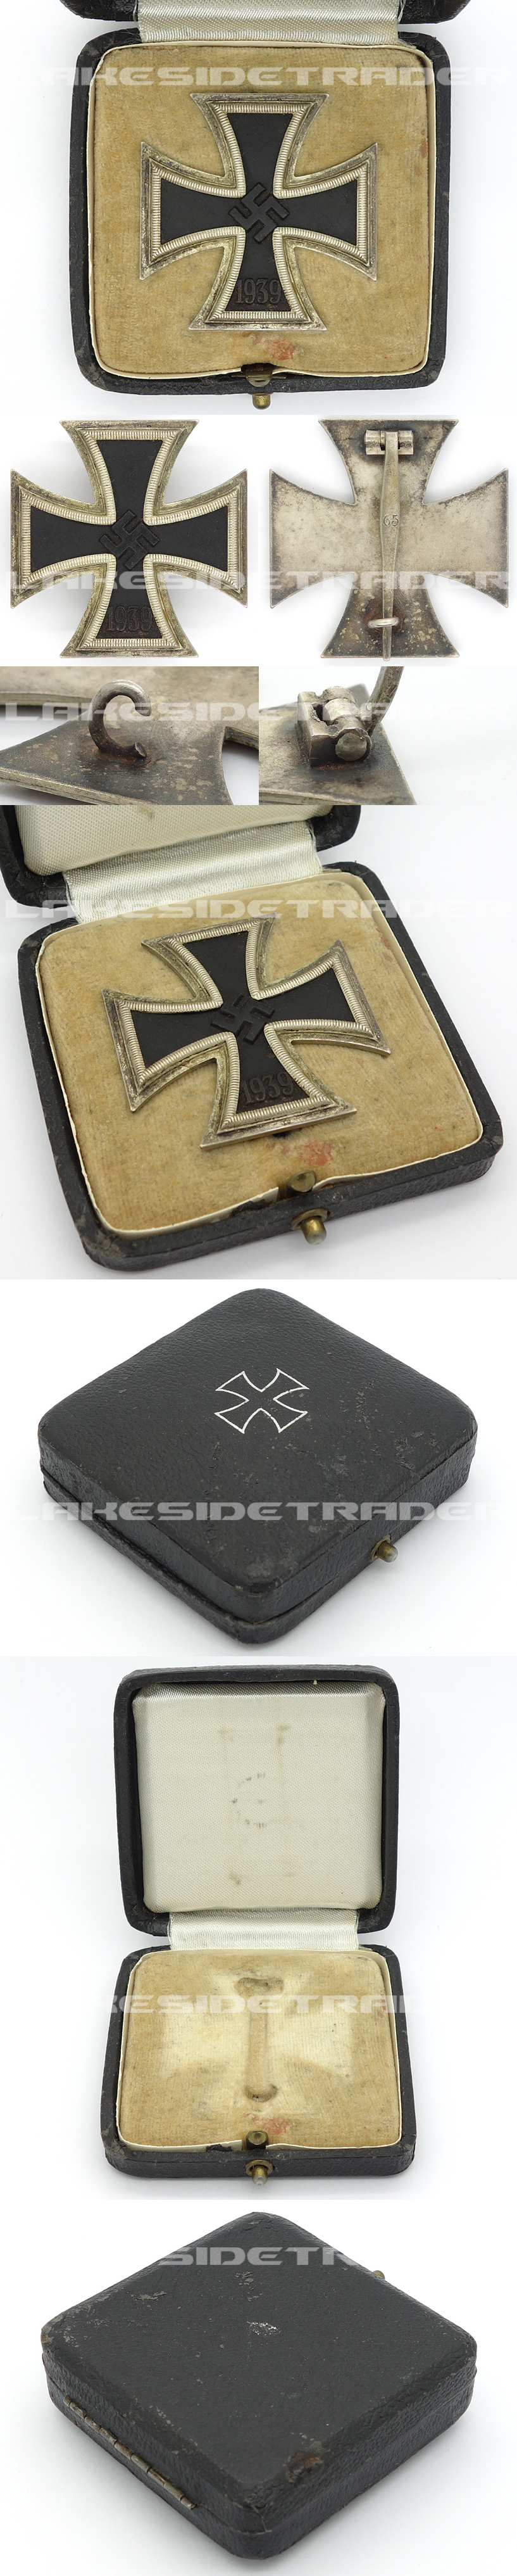 Cased 1st Class Iron Cross by 65